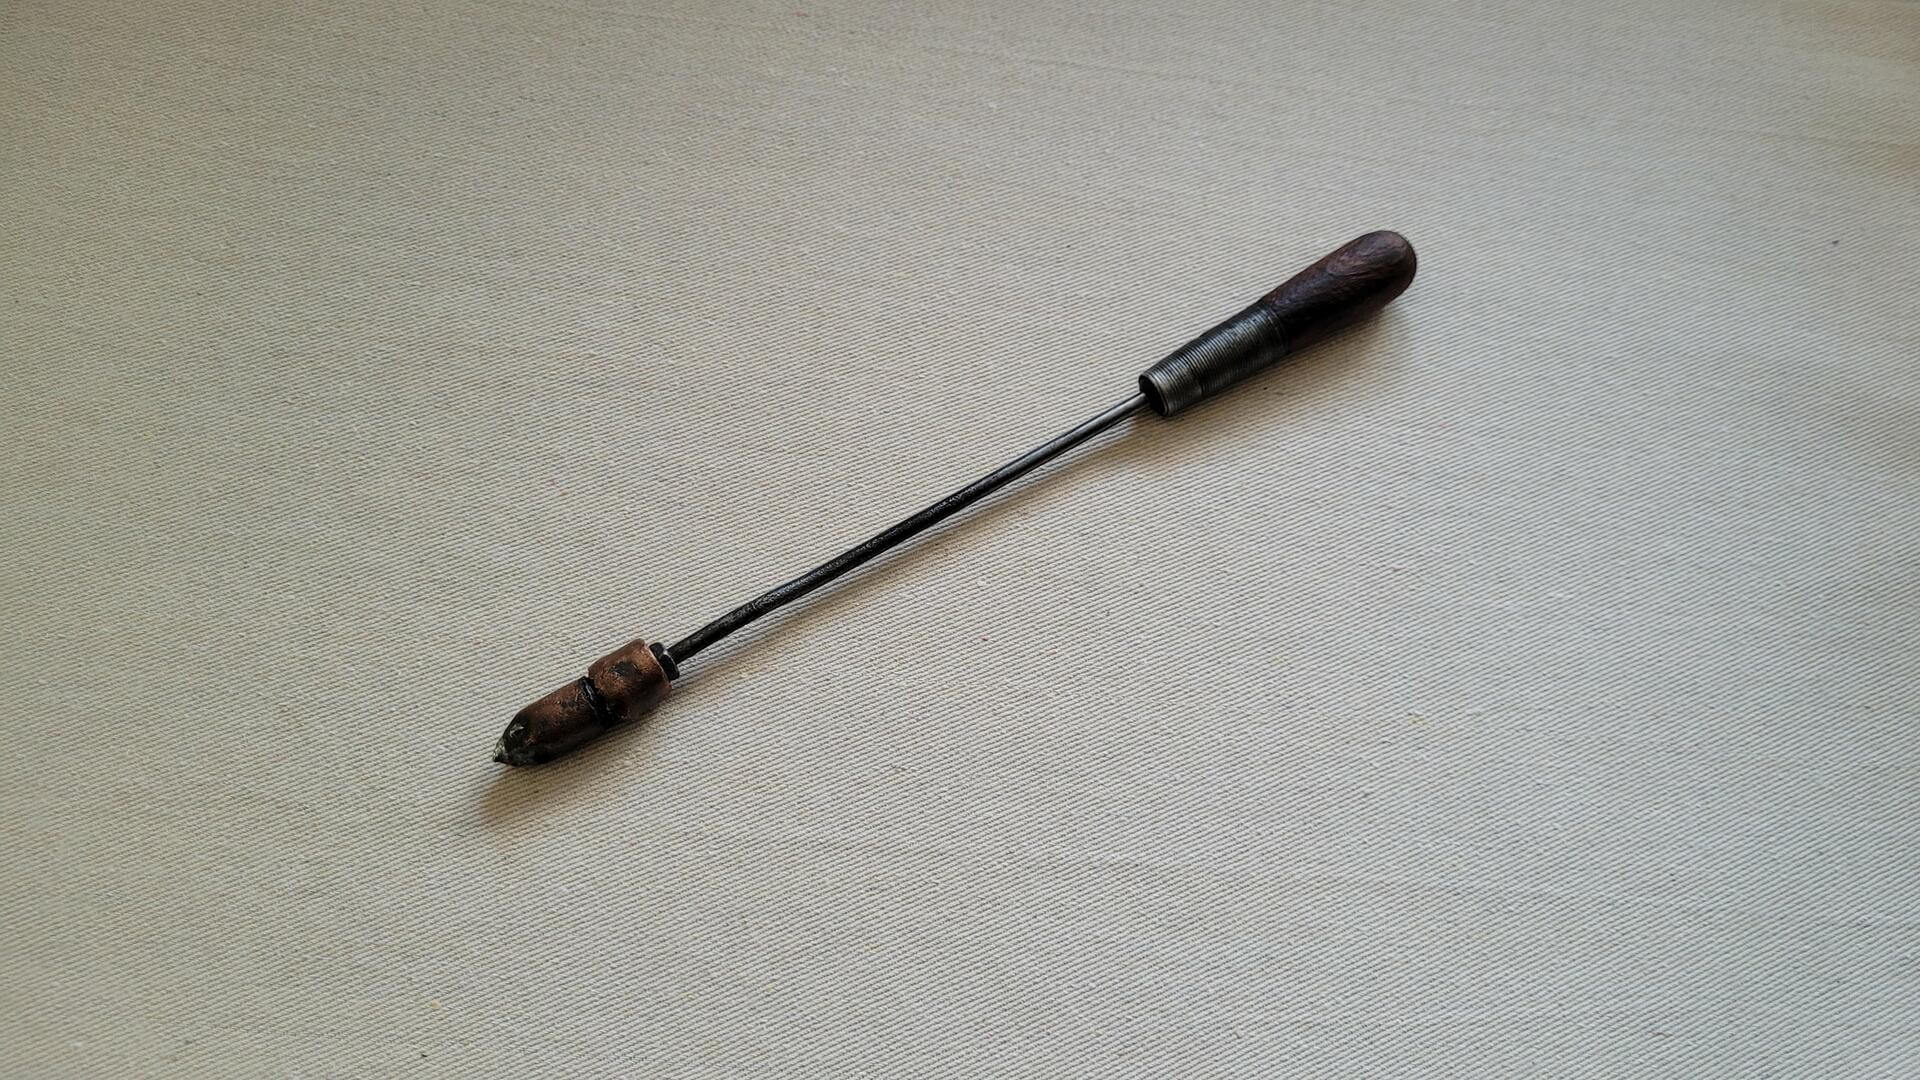 Vintage copper tip soldering iron with wooden handle 11″ inches long. Antique primitive collectible tinsmith, electrician and plumbing solder hand tool